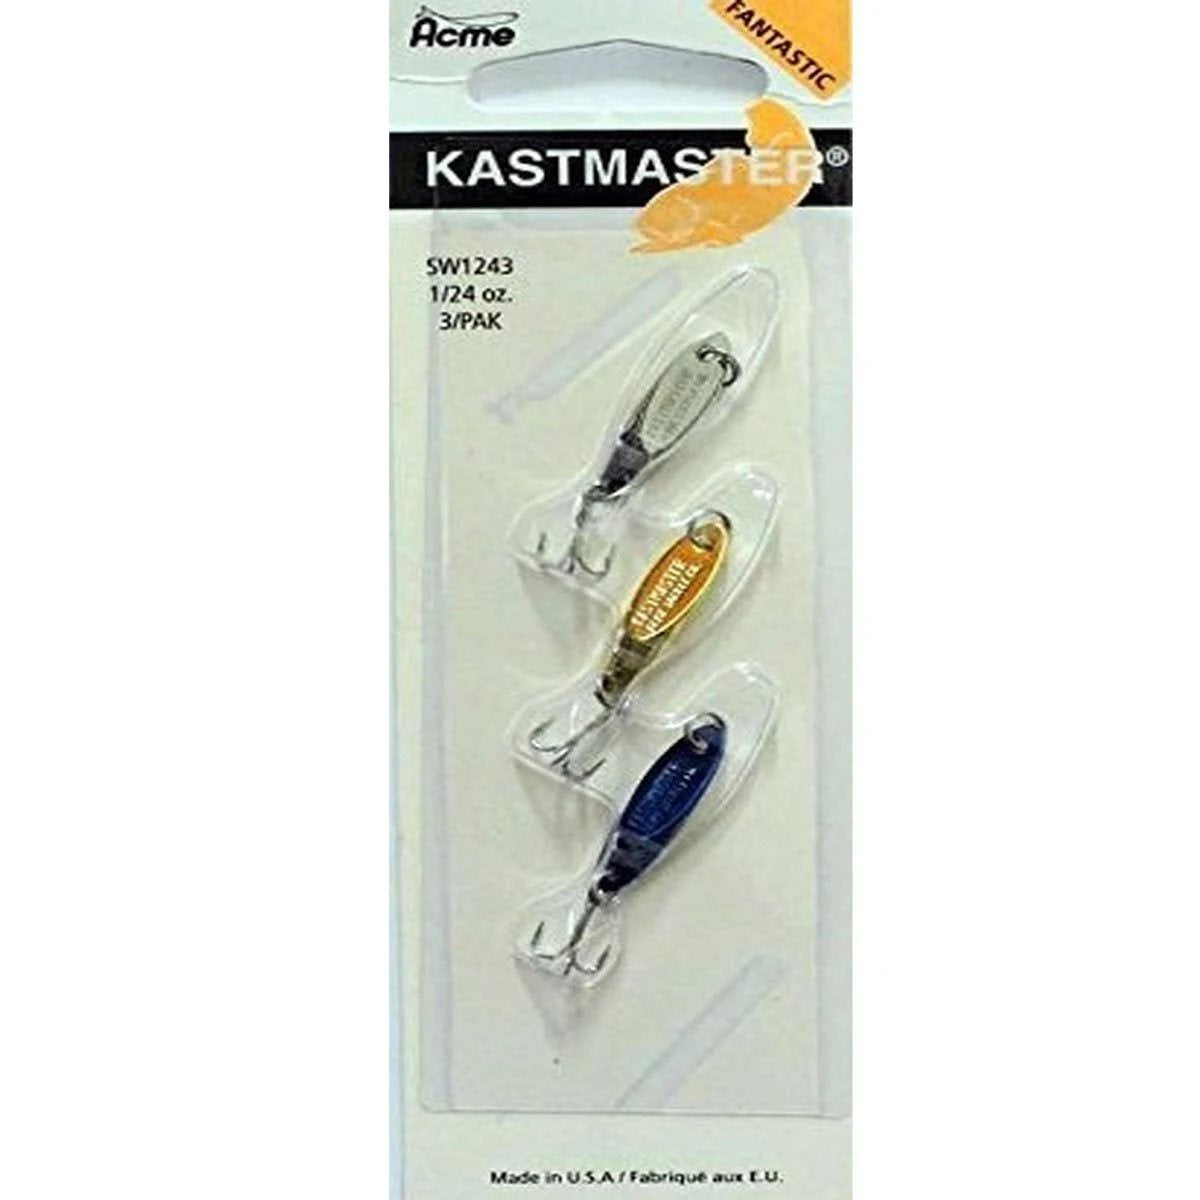 Out of Stock* Acme Kastmaster 1/8 oz- Treble- 3 pack